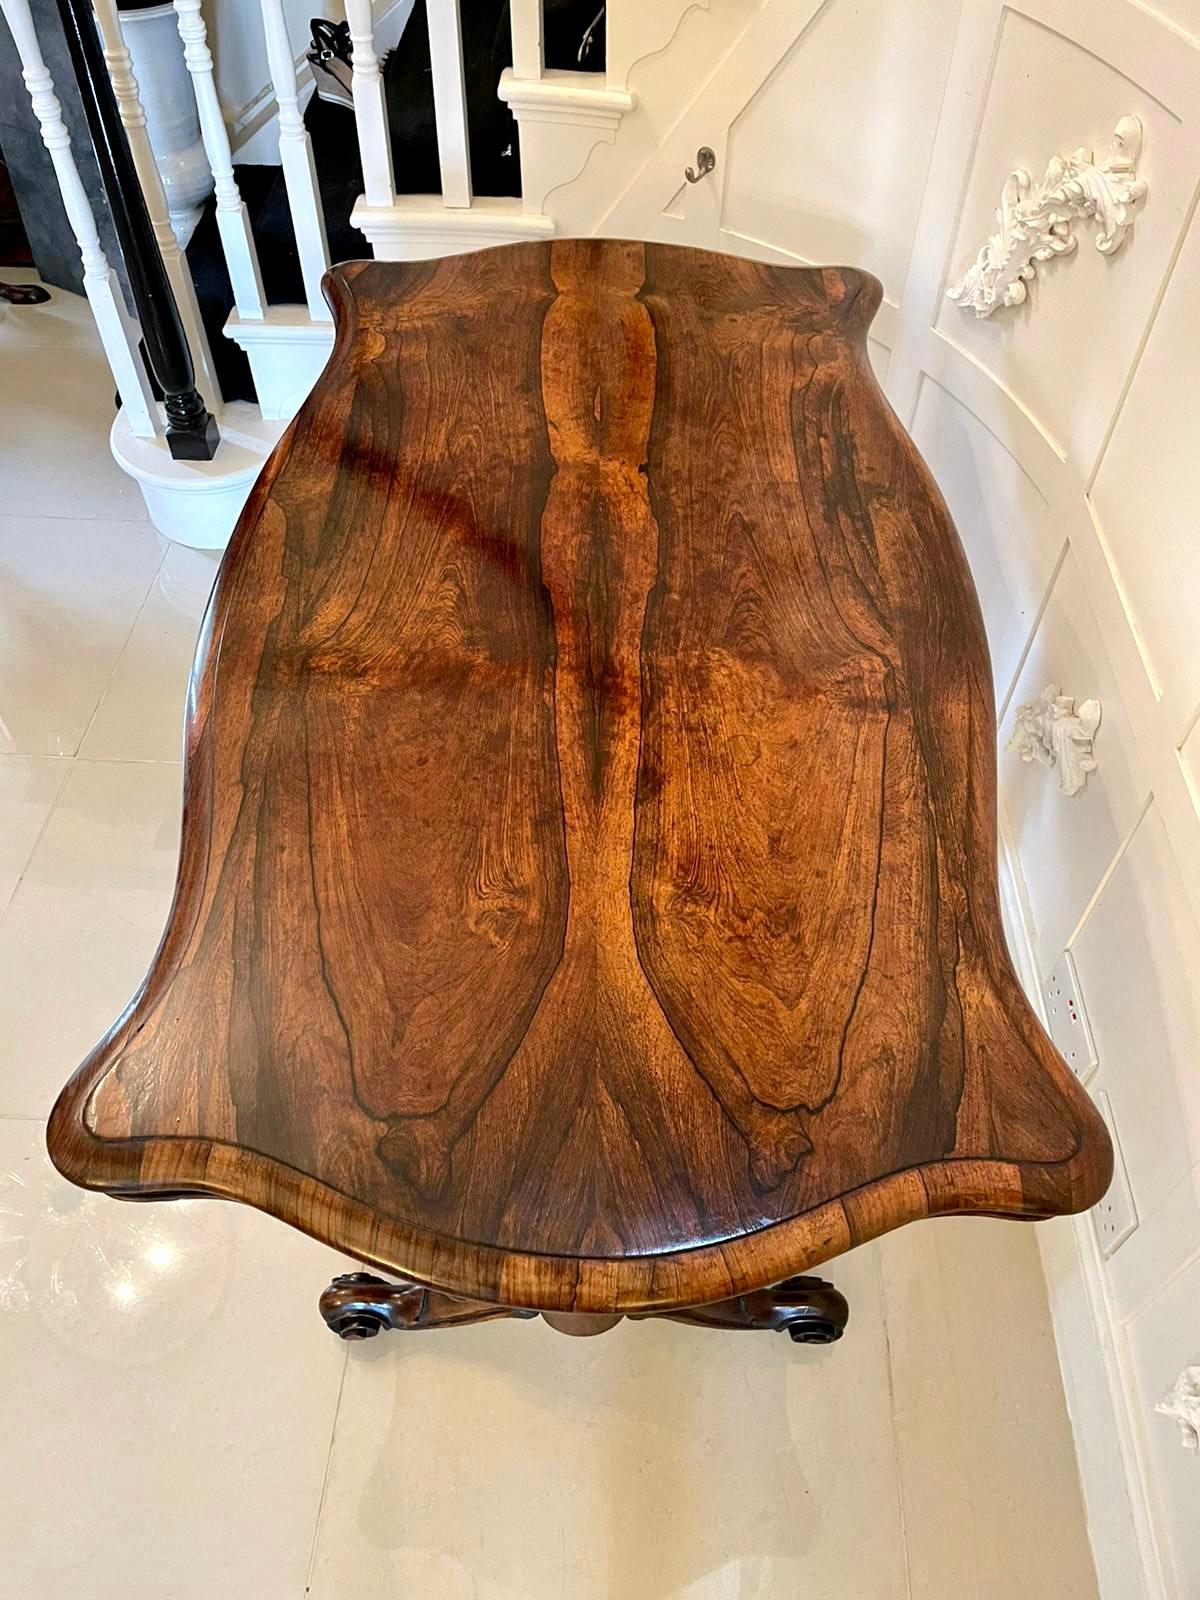 Large quality antique Victorian carved rosewood centre table having a quality rosewood serpentine shaped top with a moulded edge, serpentine shaped frieze with a beaded edge supported by solid rosewood shaped columns. It stands on beautifully shaped